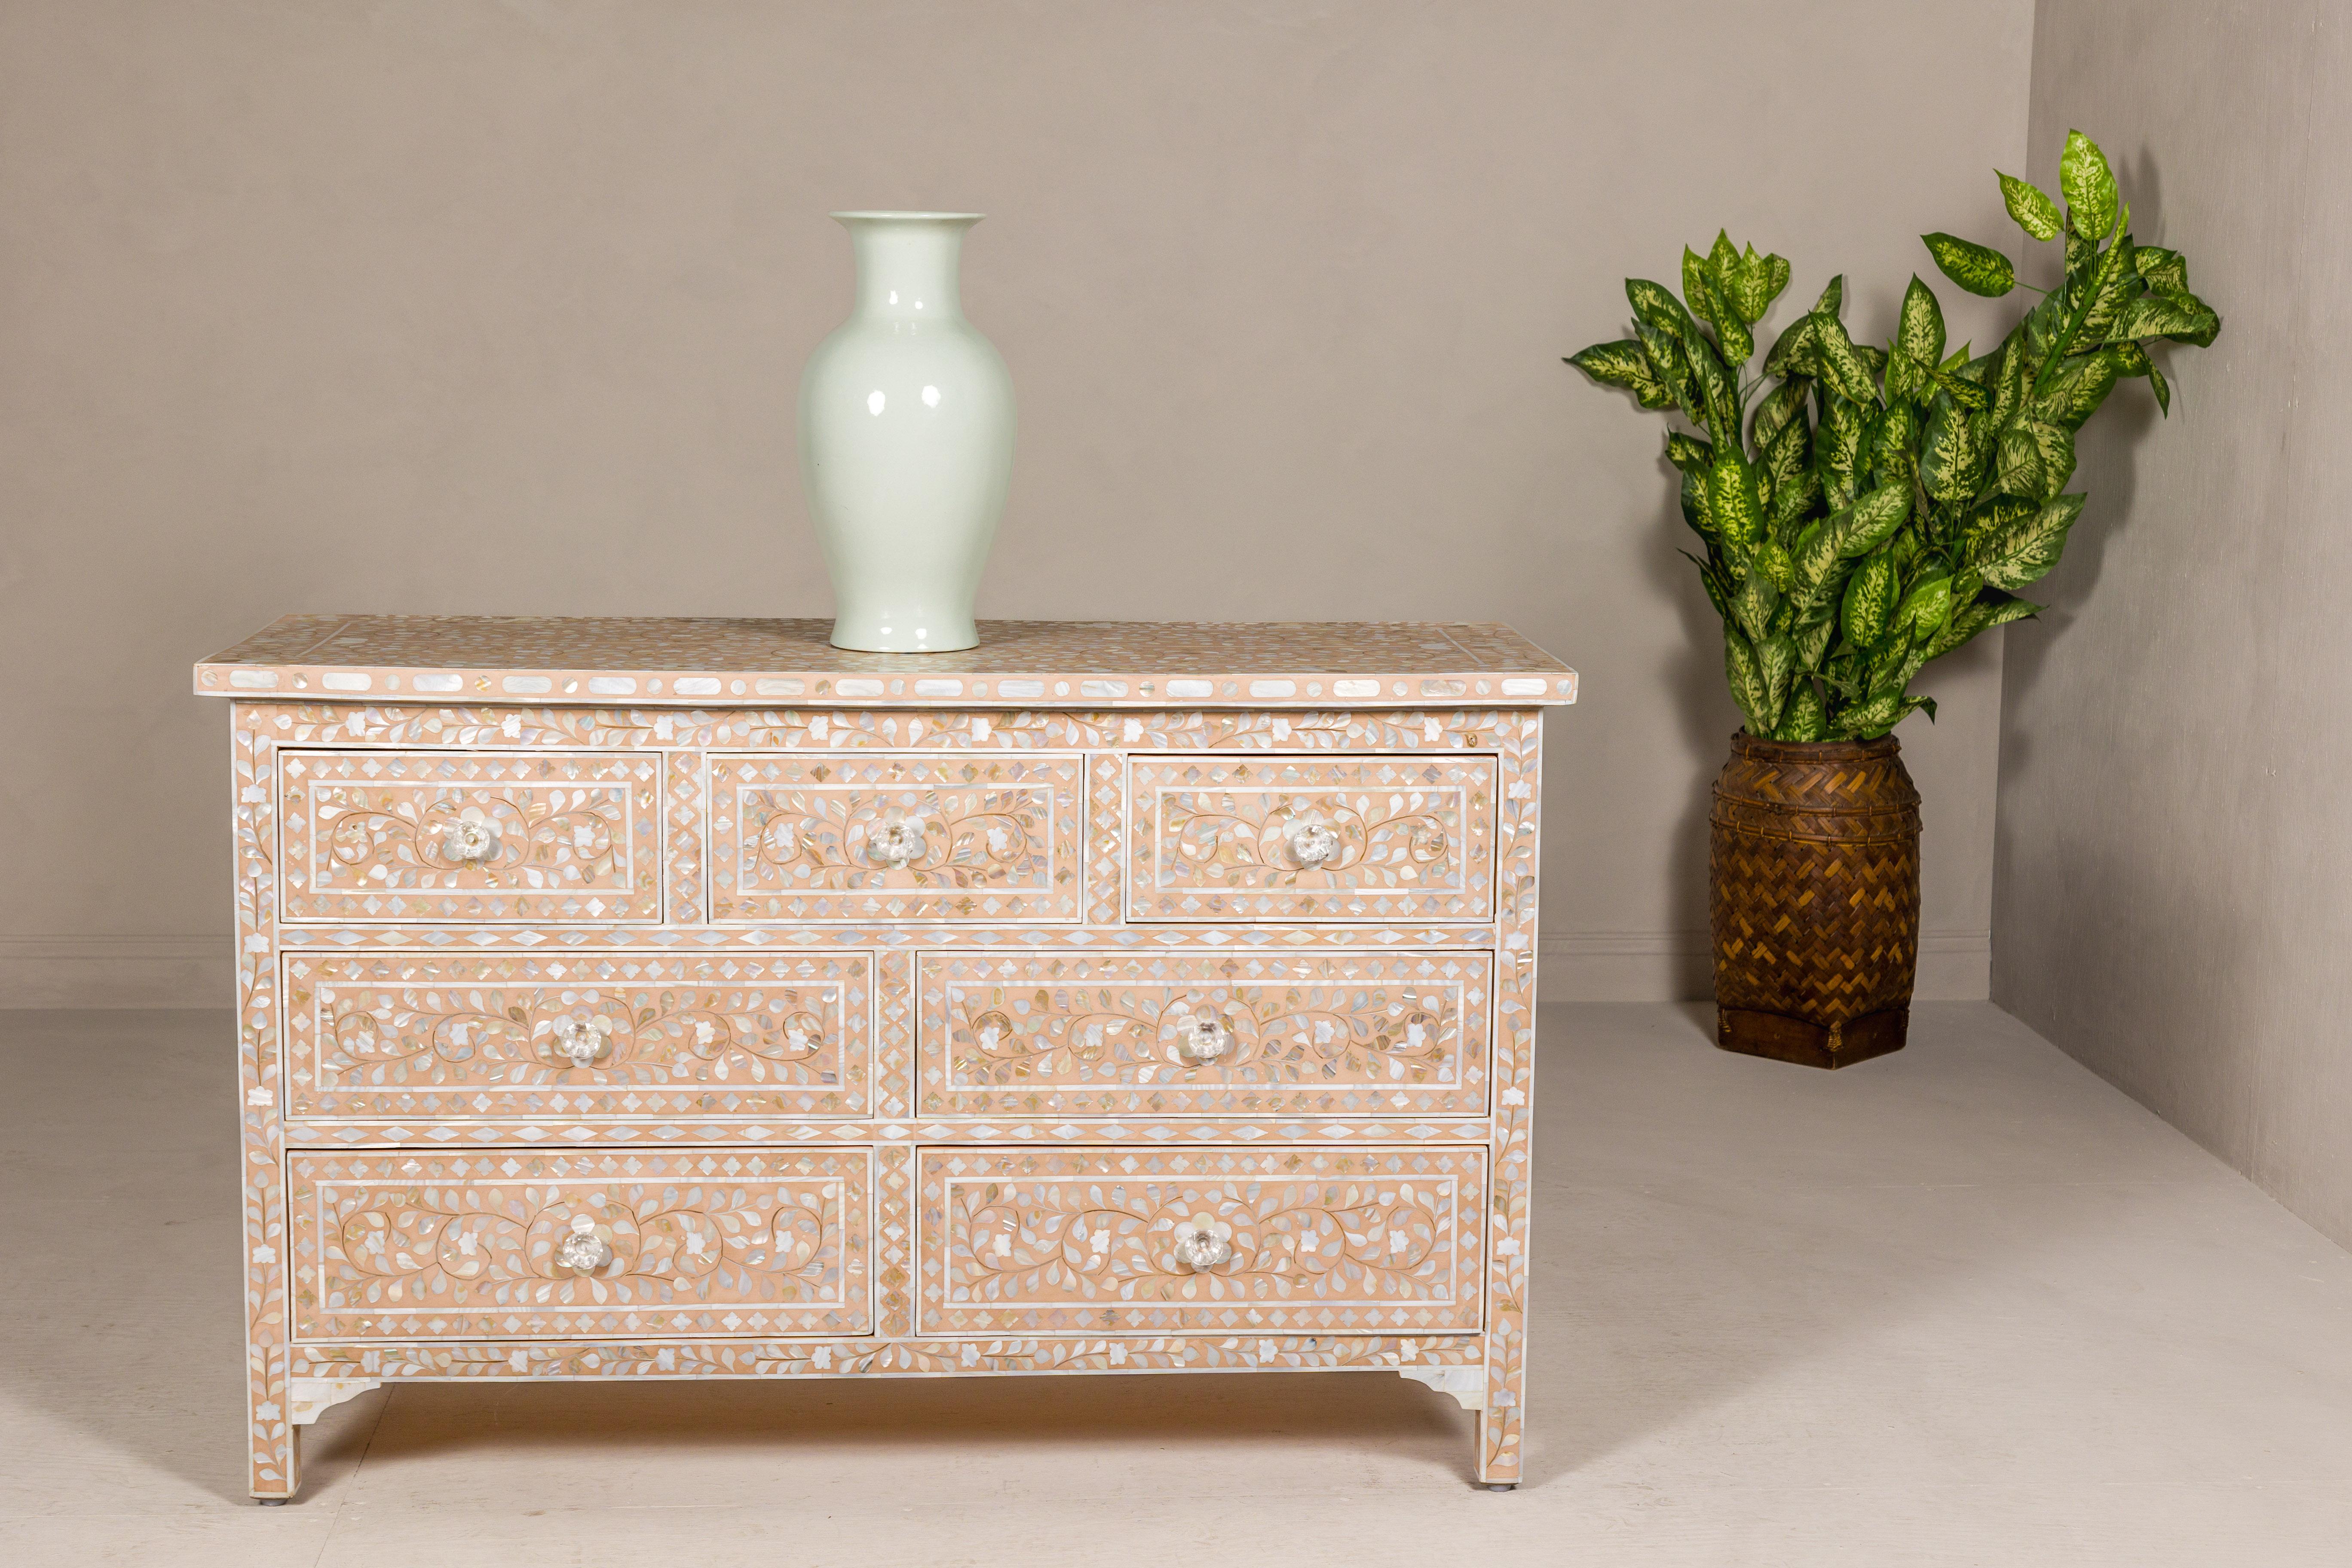 An Anglo-Indian style soft pink dresser with floral themed mother-of-pearl inlay and seven drawers. Radiating an air of refined elegance, this Anglo-Indian style dresser, bathed in a soft pink hue, is a true symphony of artistry and function.